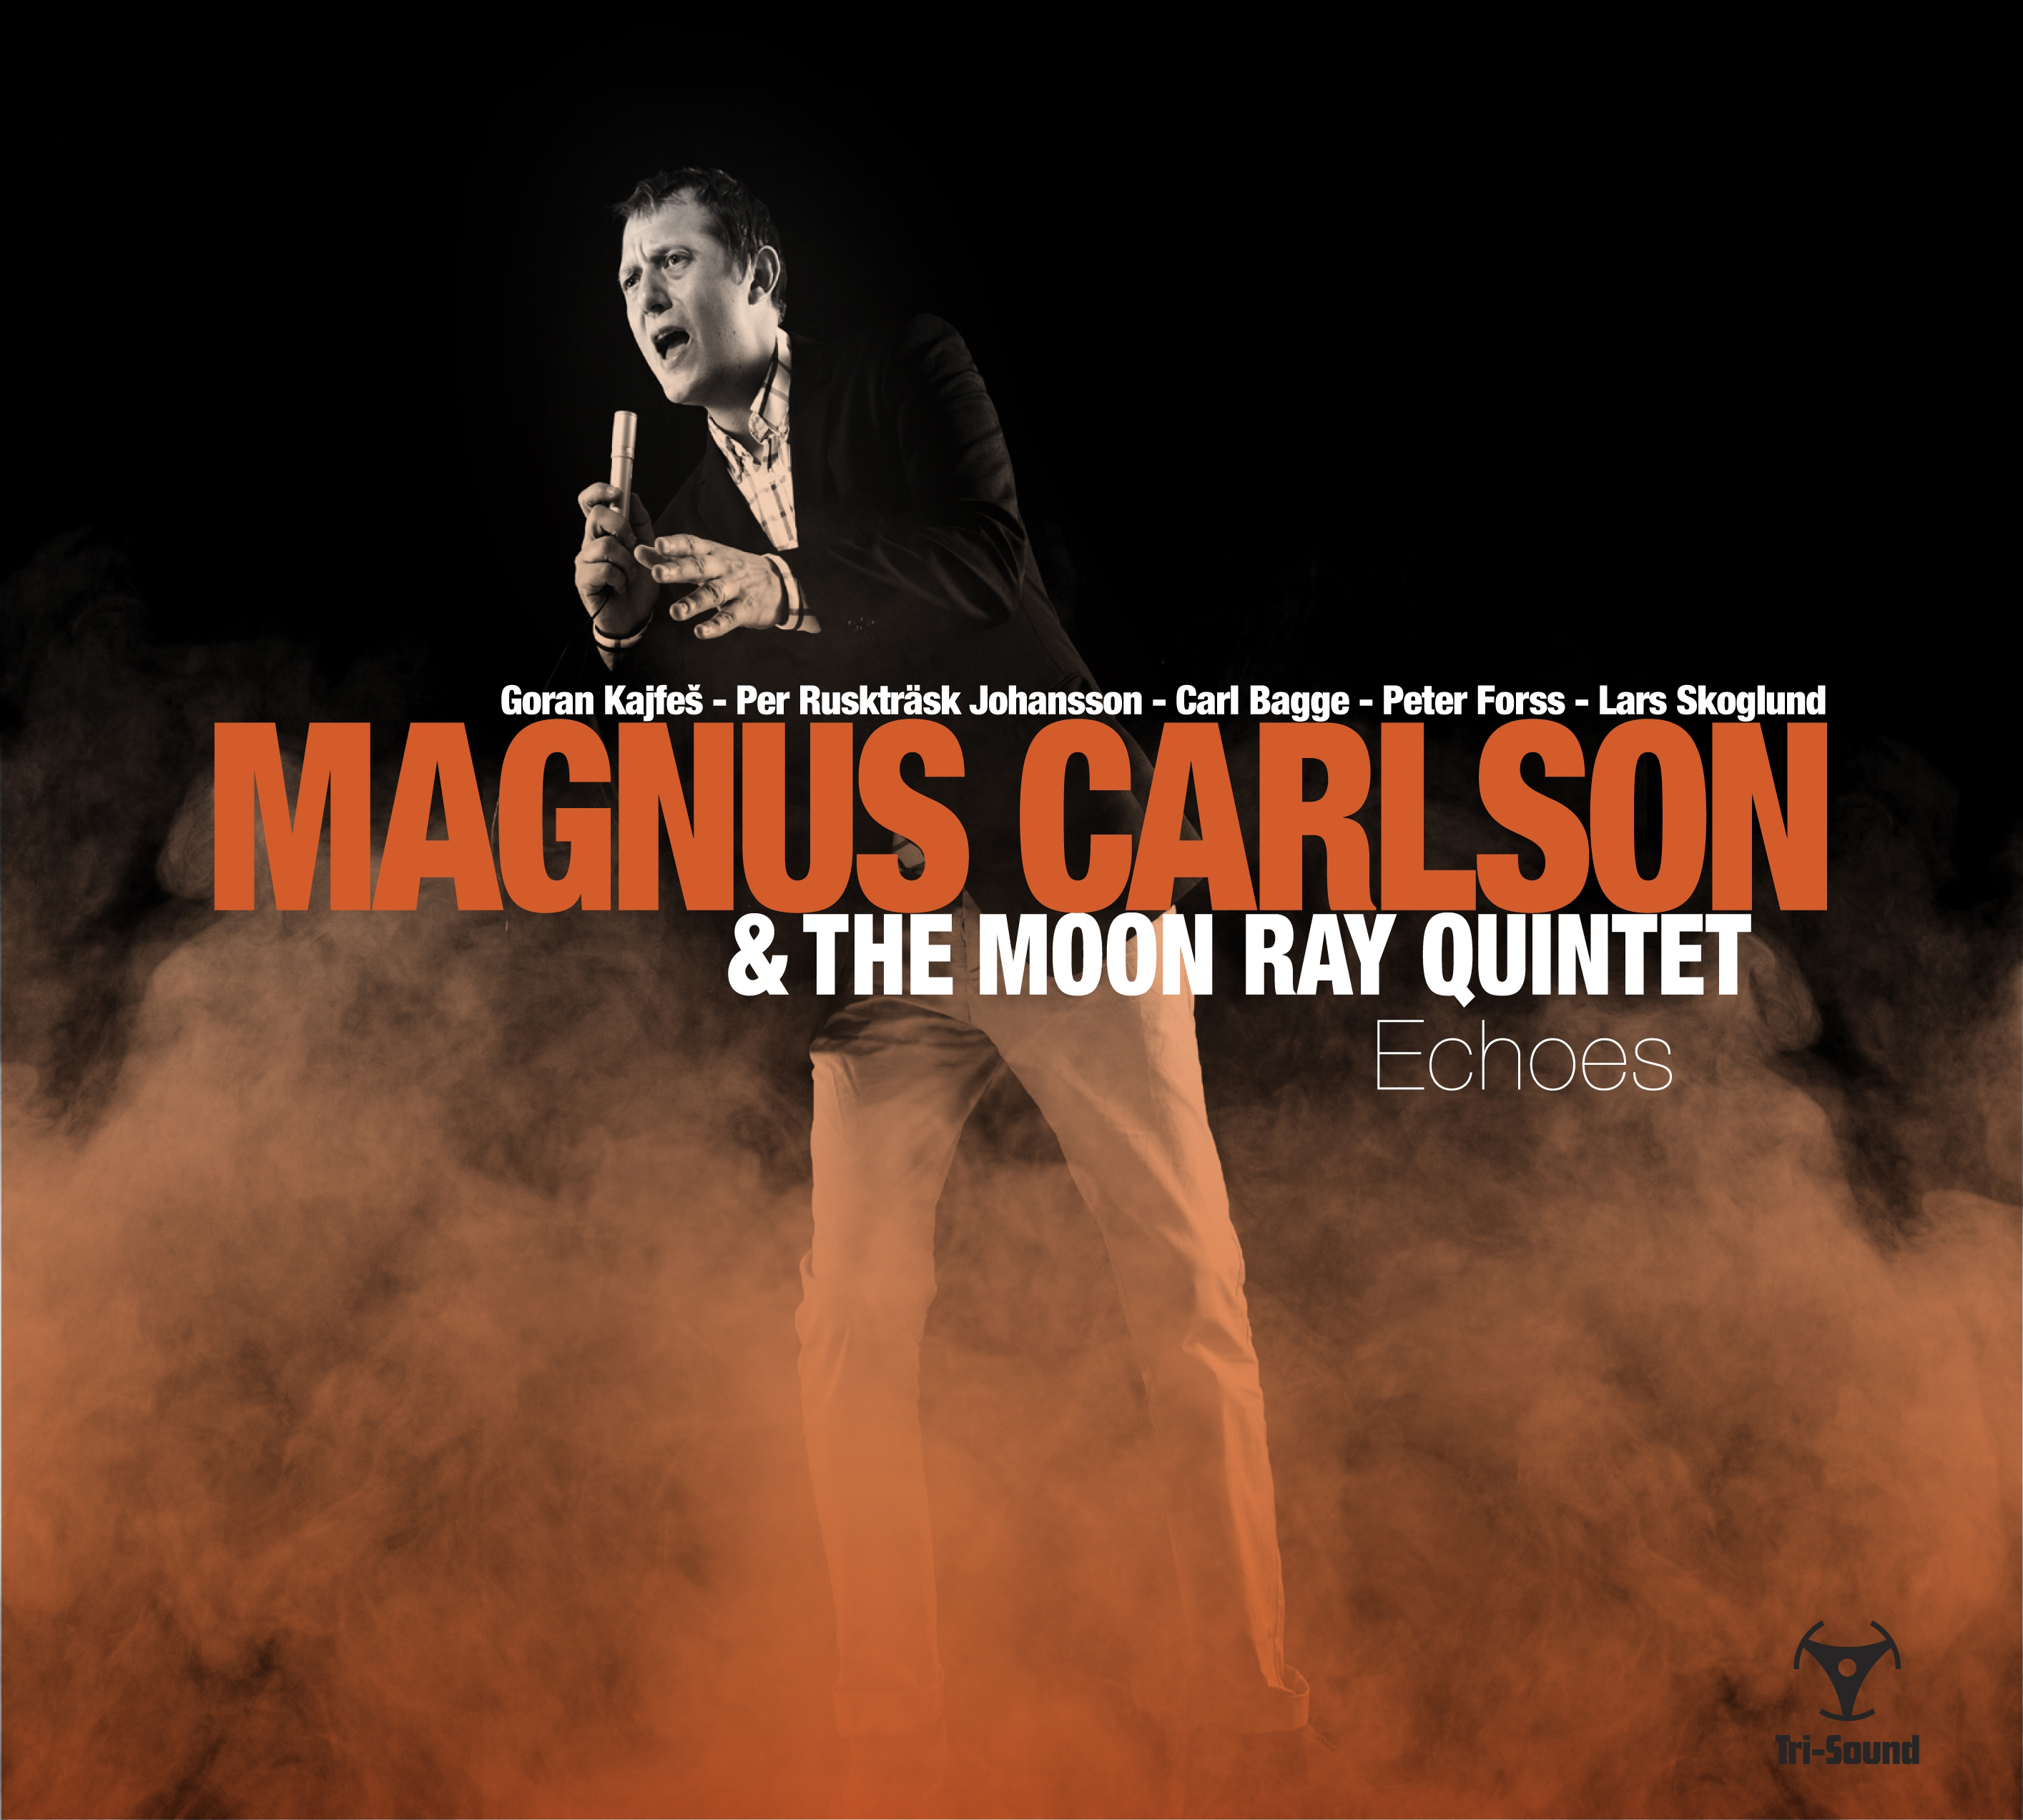 Magnus Carlson & The Moon Ray Quintet - Echoes (+download code)